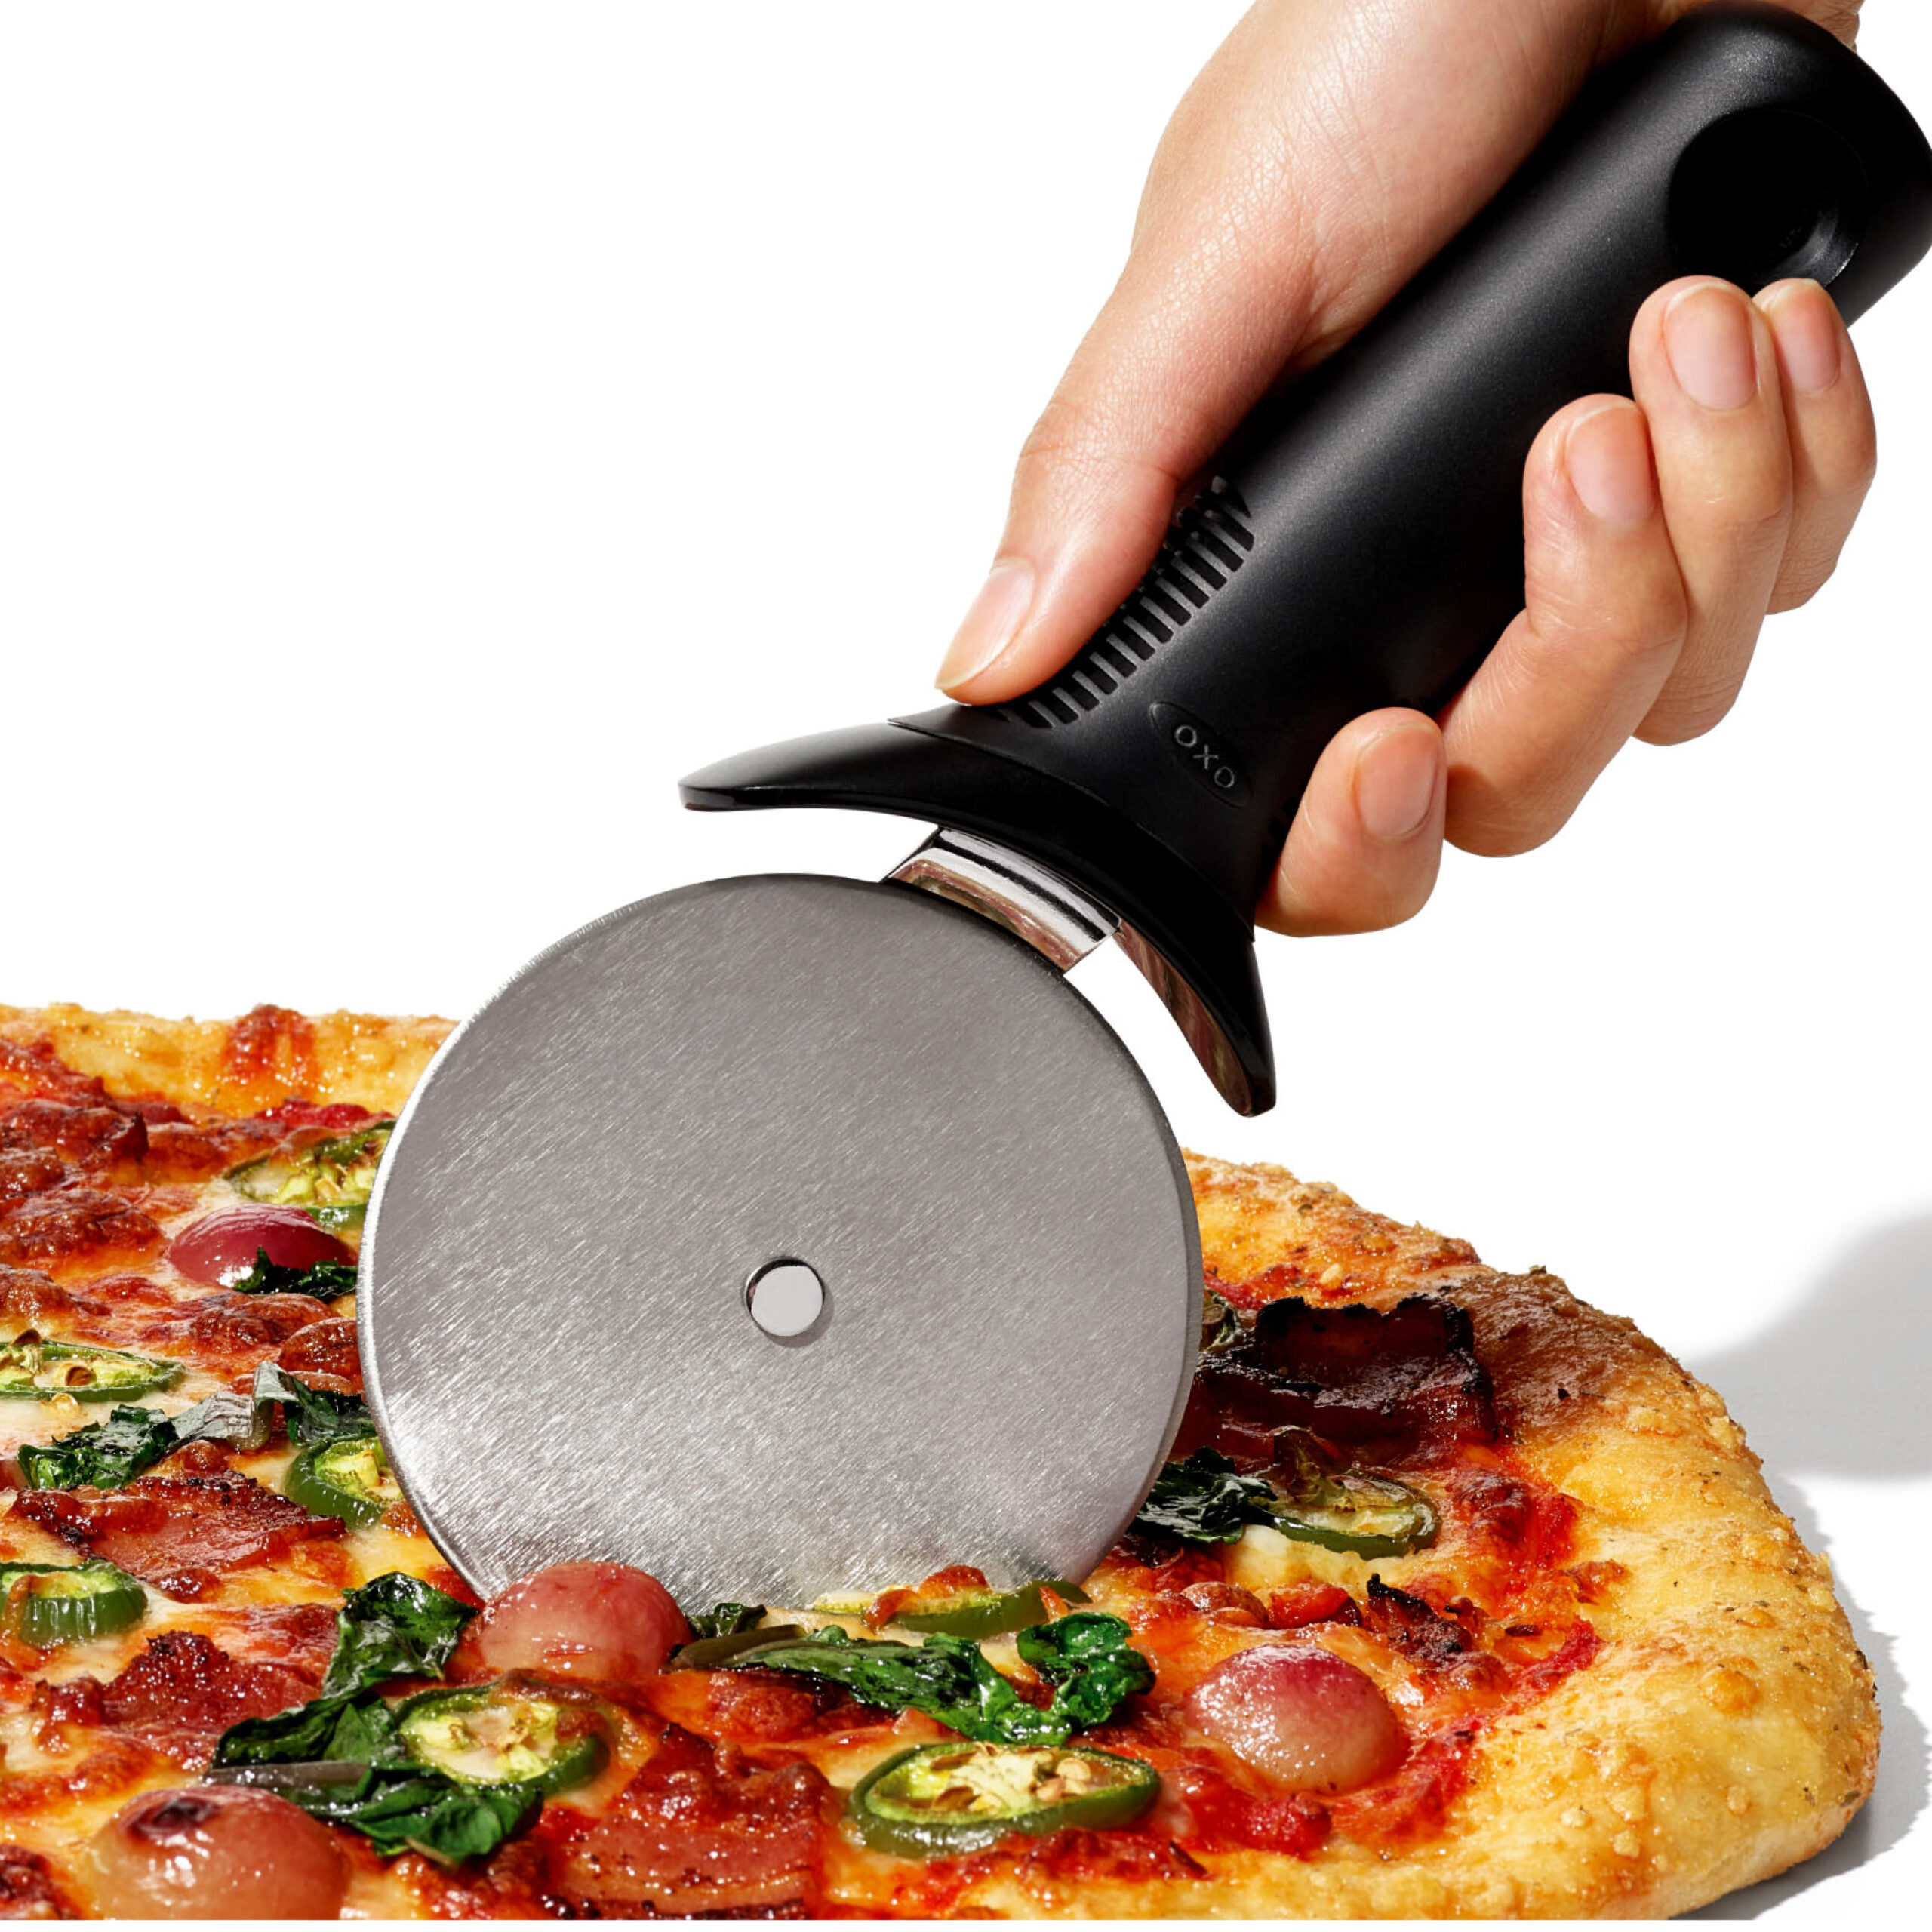 OXO Good Grips Large 4 Pizza/Pastry Wheel